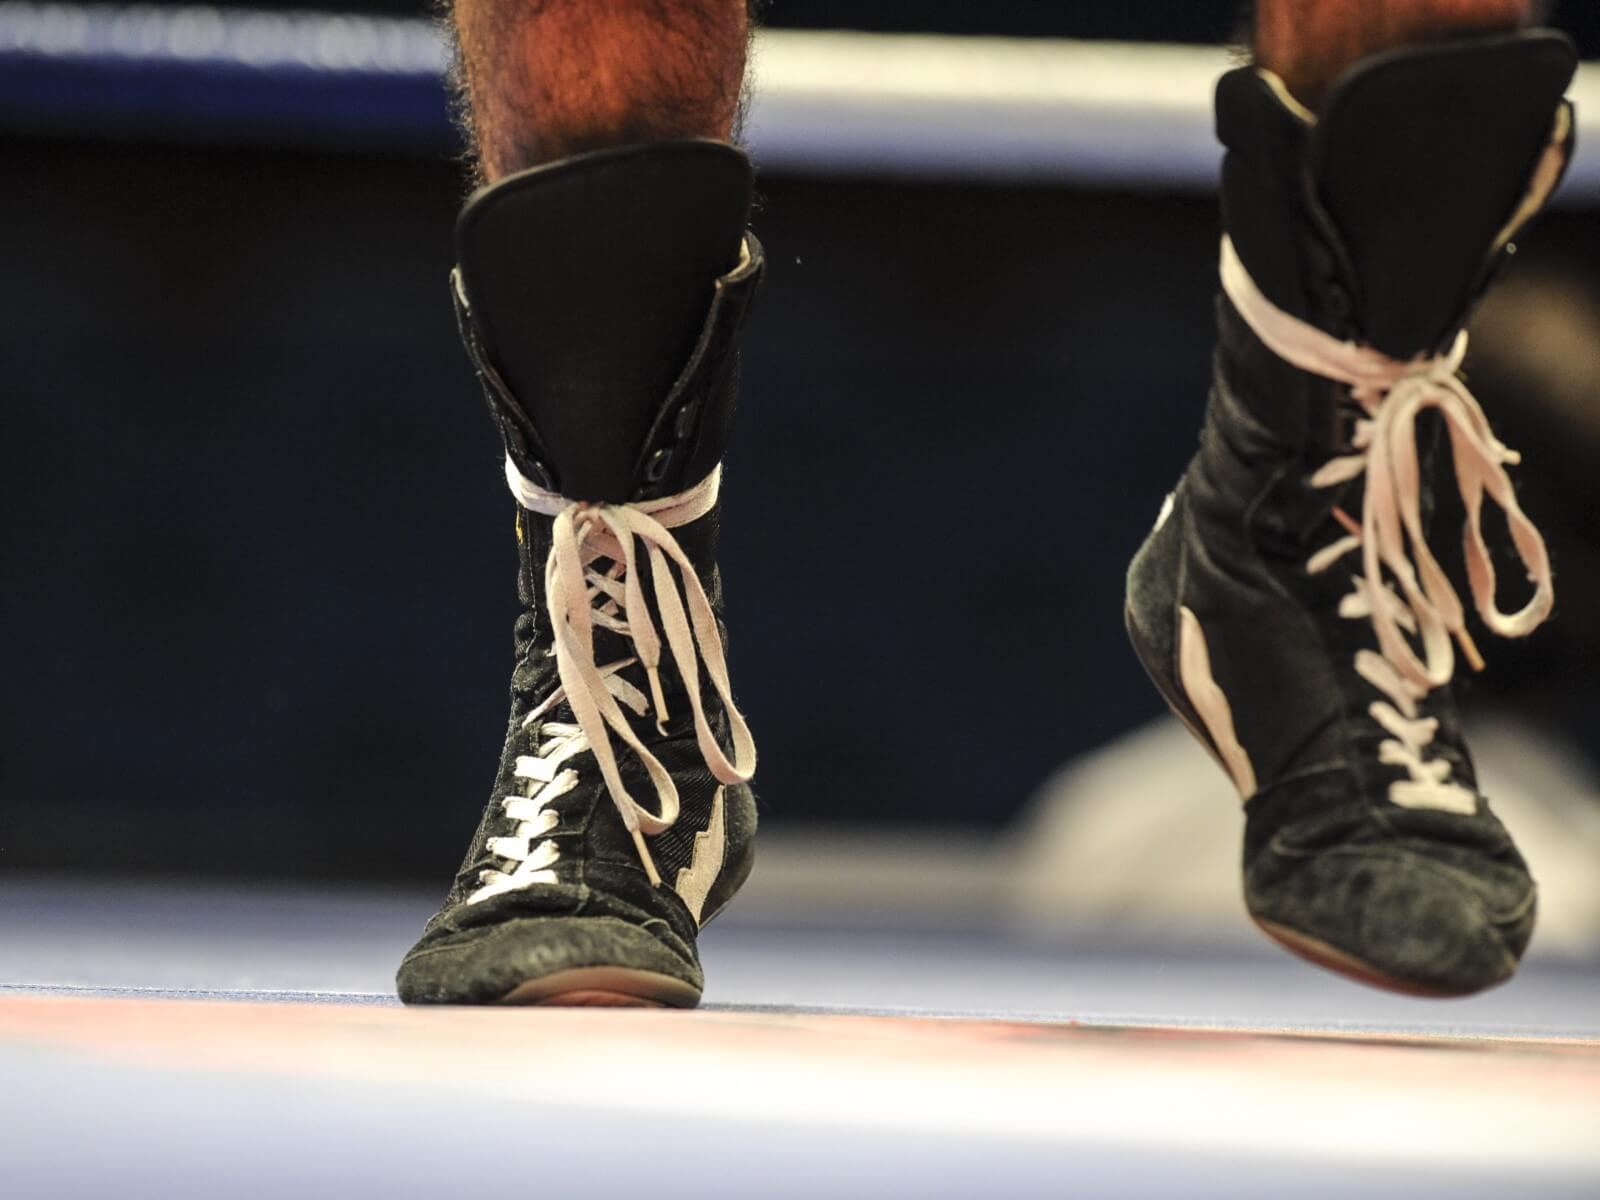 Research and choose an alternative wrestling shoe brand
Start by reading reviews and ratings from reliable sources